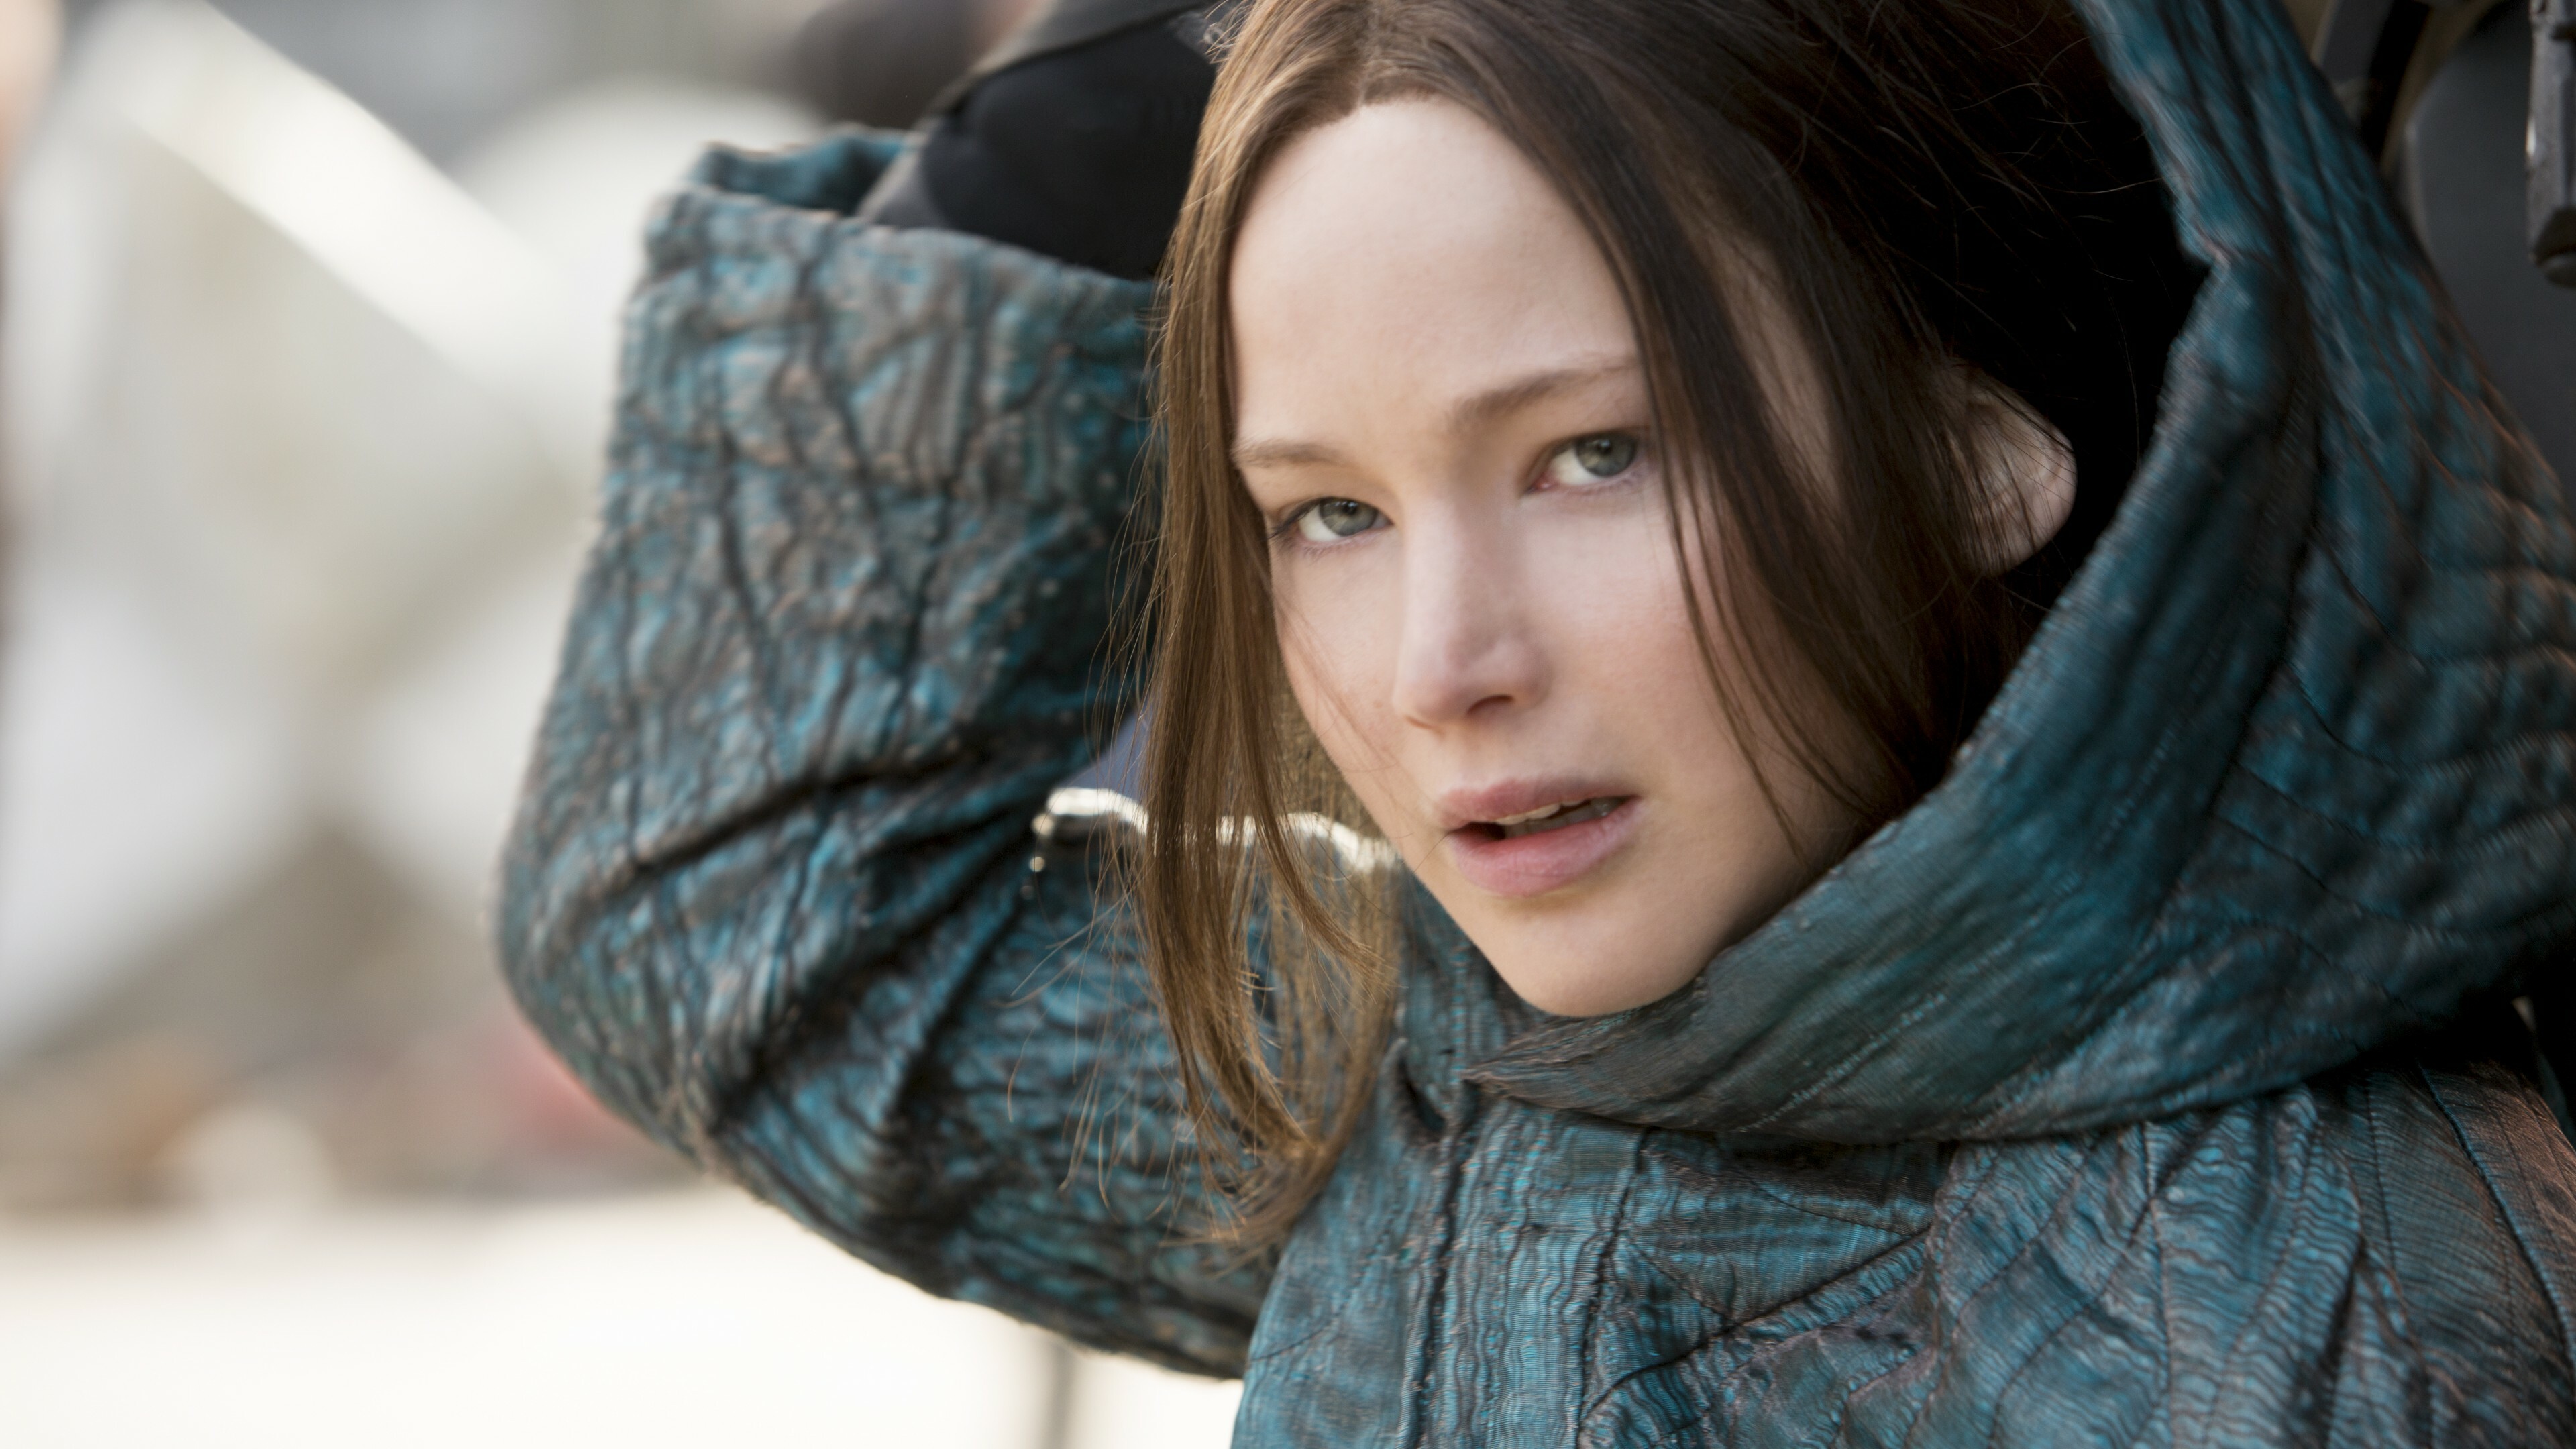 Jennifer Lawrence: Portrayed Katniss Everdeen in The Hunger Games film series. 3840x2160 4K Background.